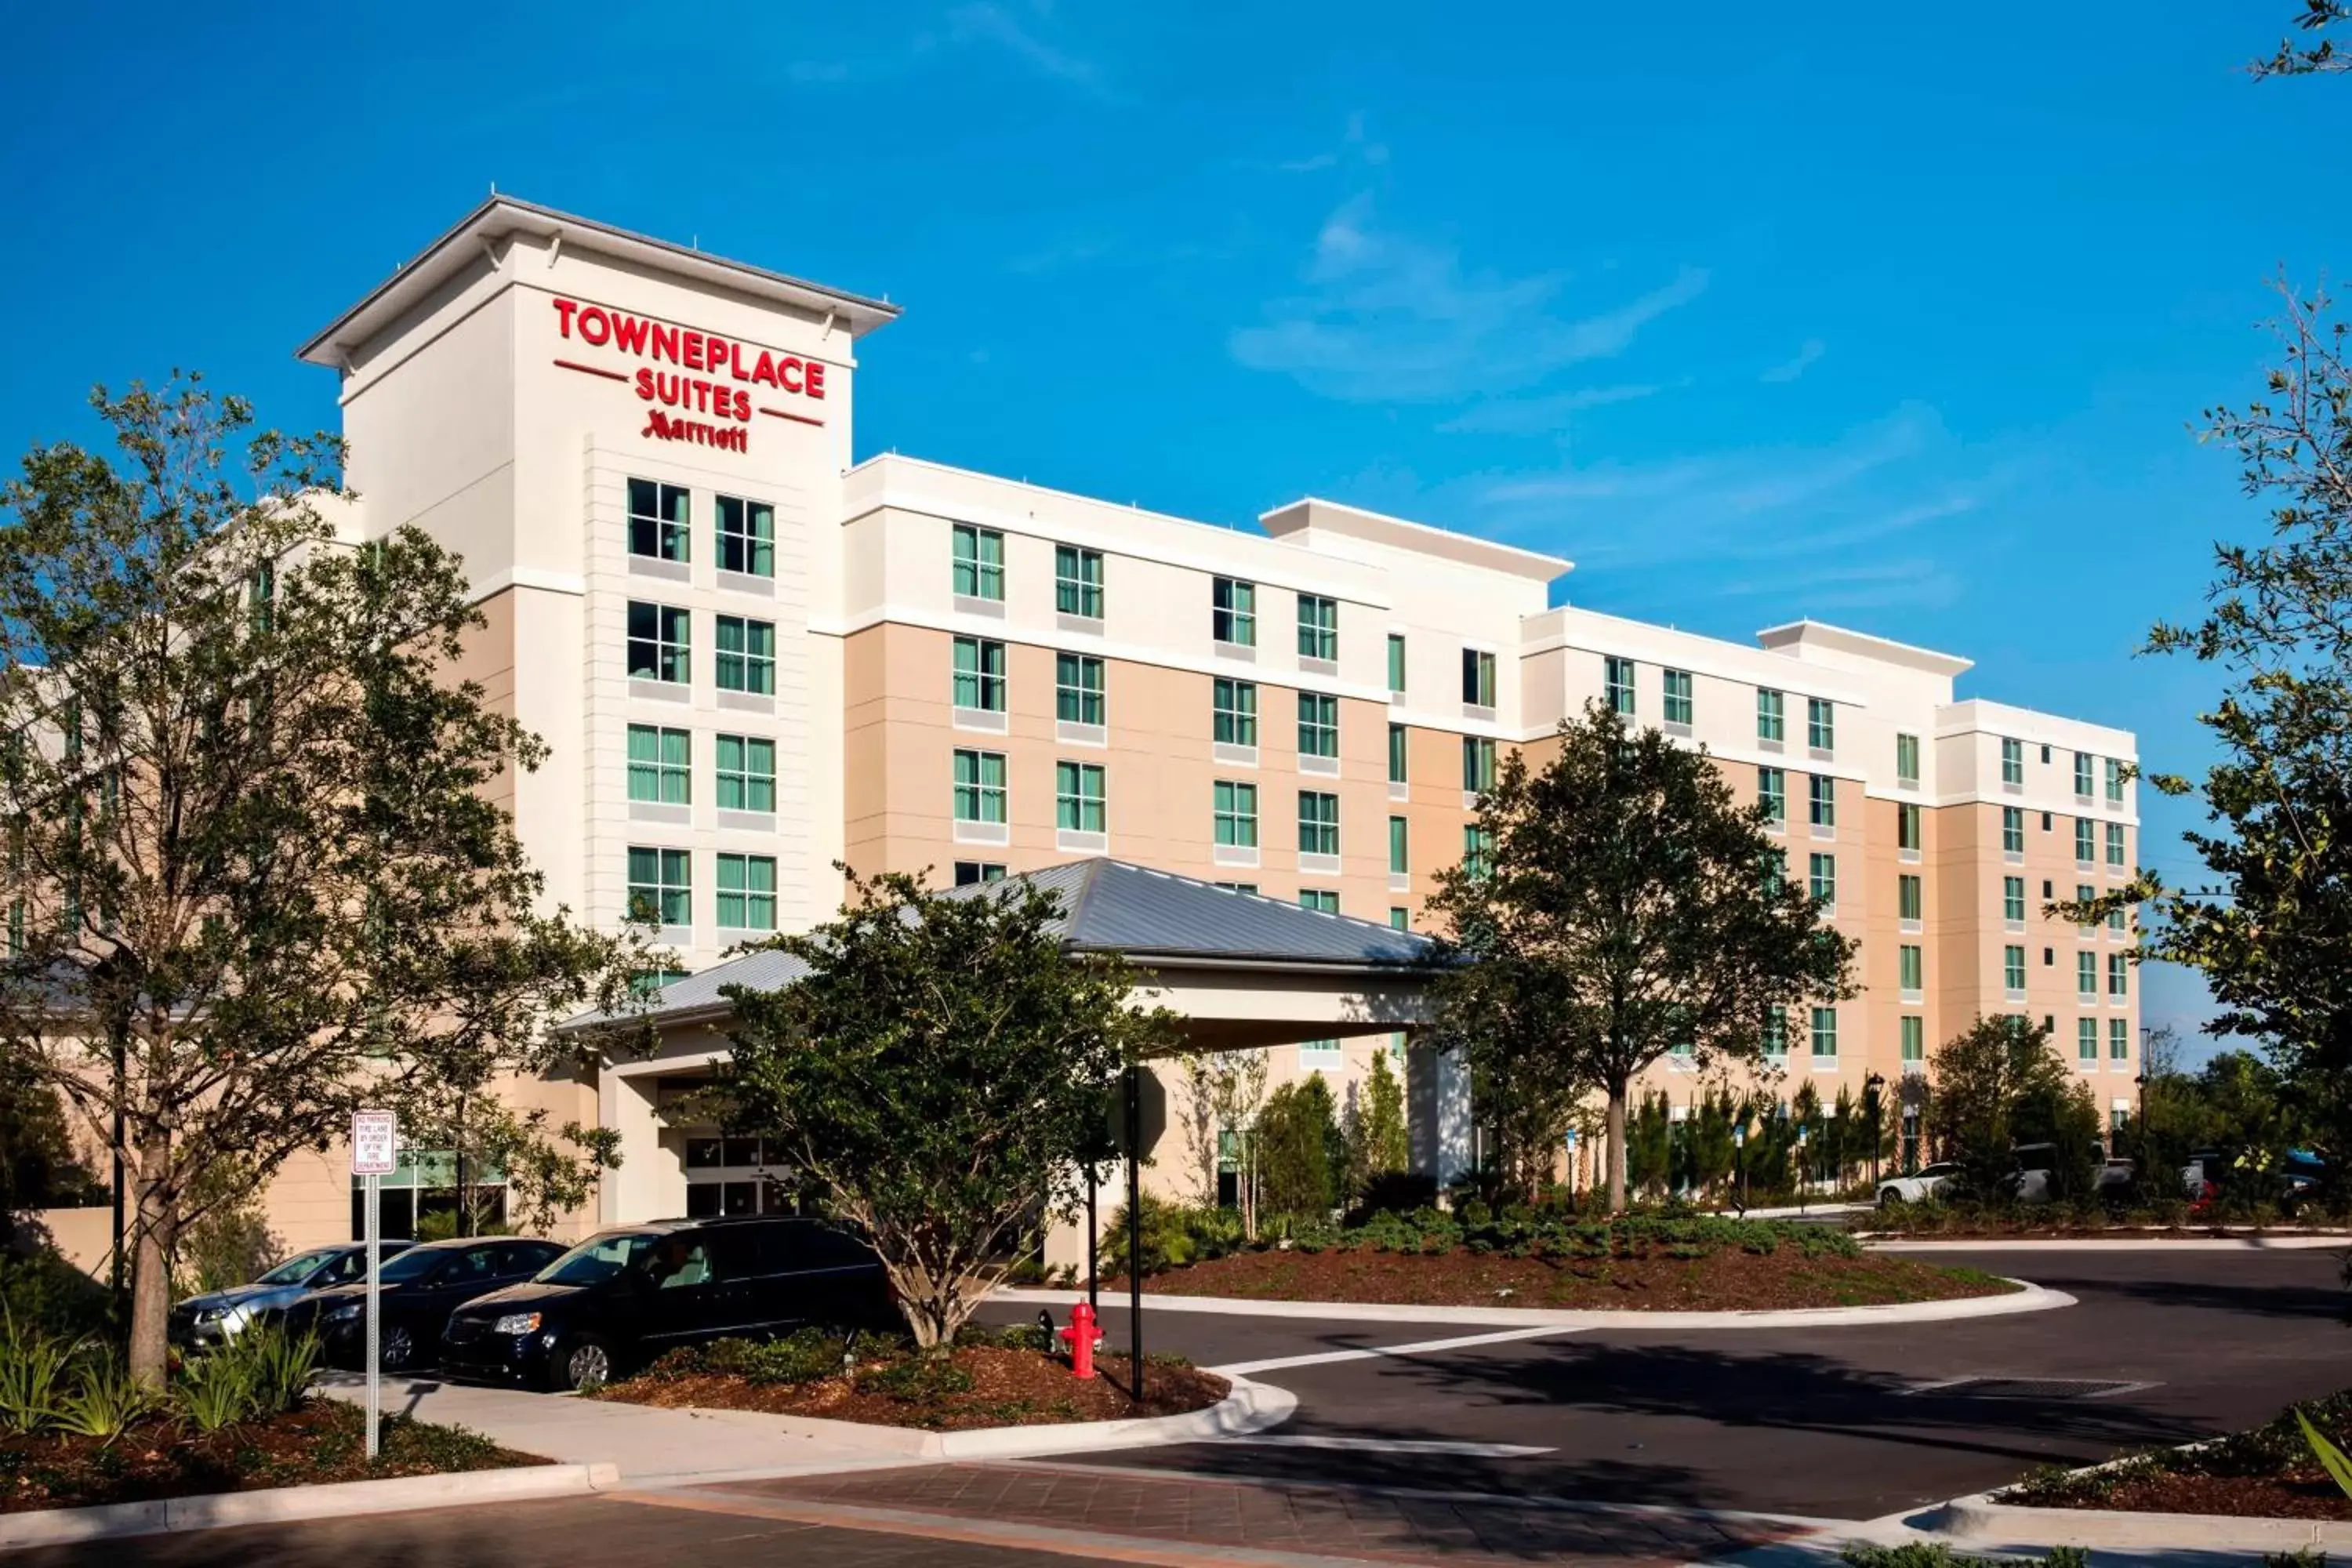 Property Building in TownePlace Suites Orlando at FLAMINGO CROSSINGS® Town Center/Western Entrance